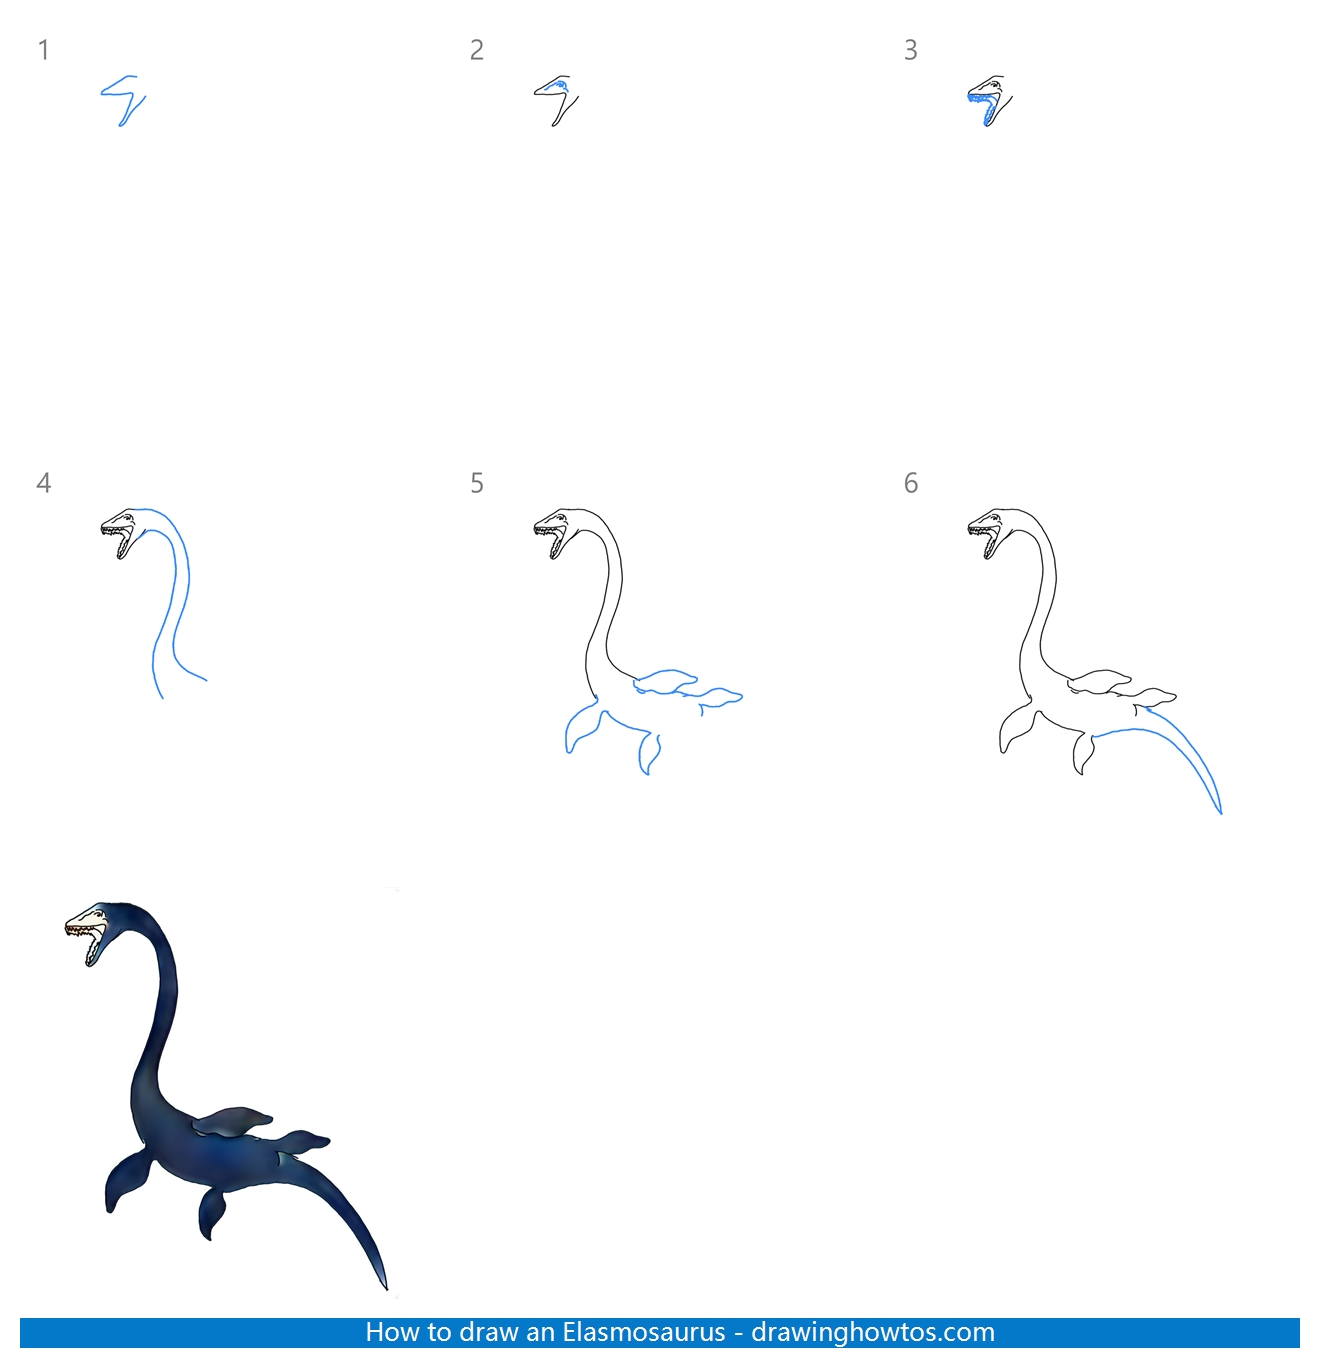 How to Draw an Elasmosaurus Step by Step